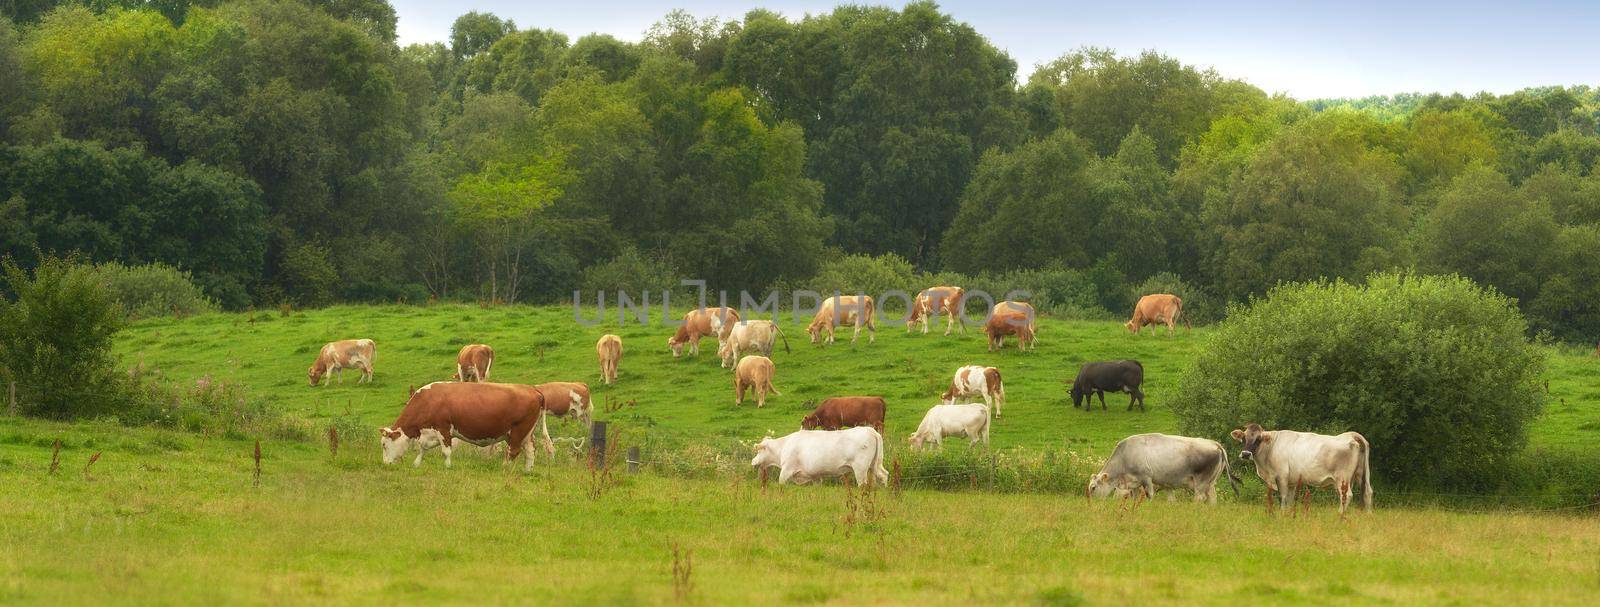 Herd of cows eating grass on a field in the rural countryside. Lush landscape with cattle animals grazing on a pasture in nature. Raising and breeding livestock on a ranch for beef and dairy industry by YuriArcurs